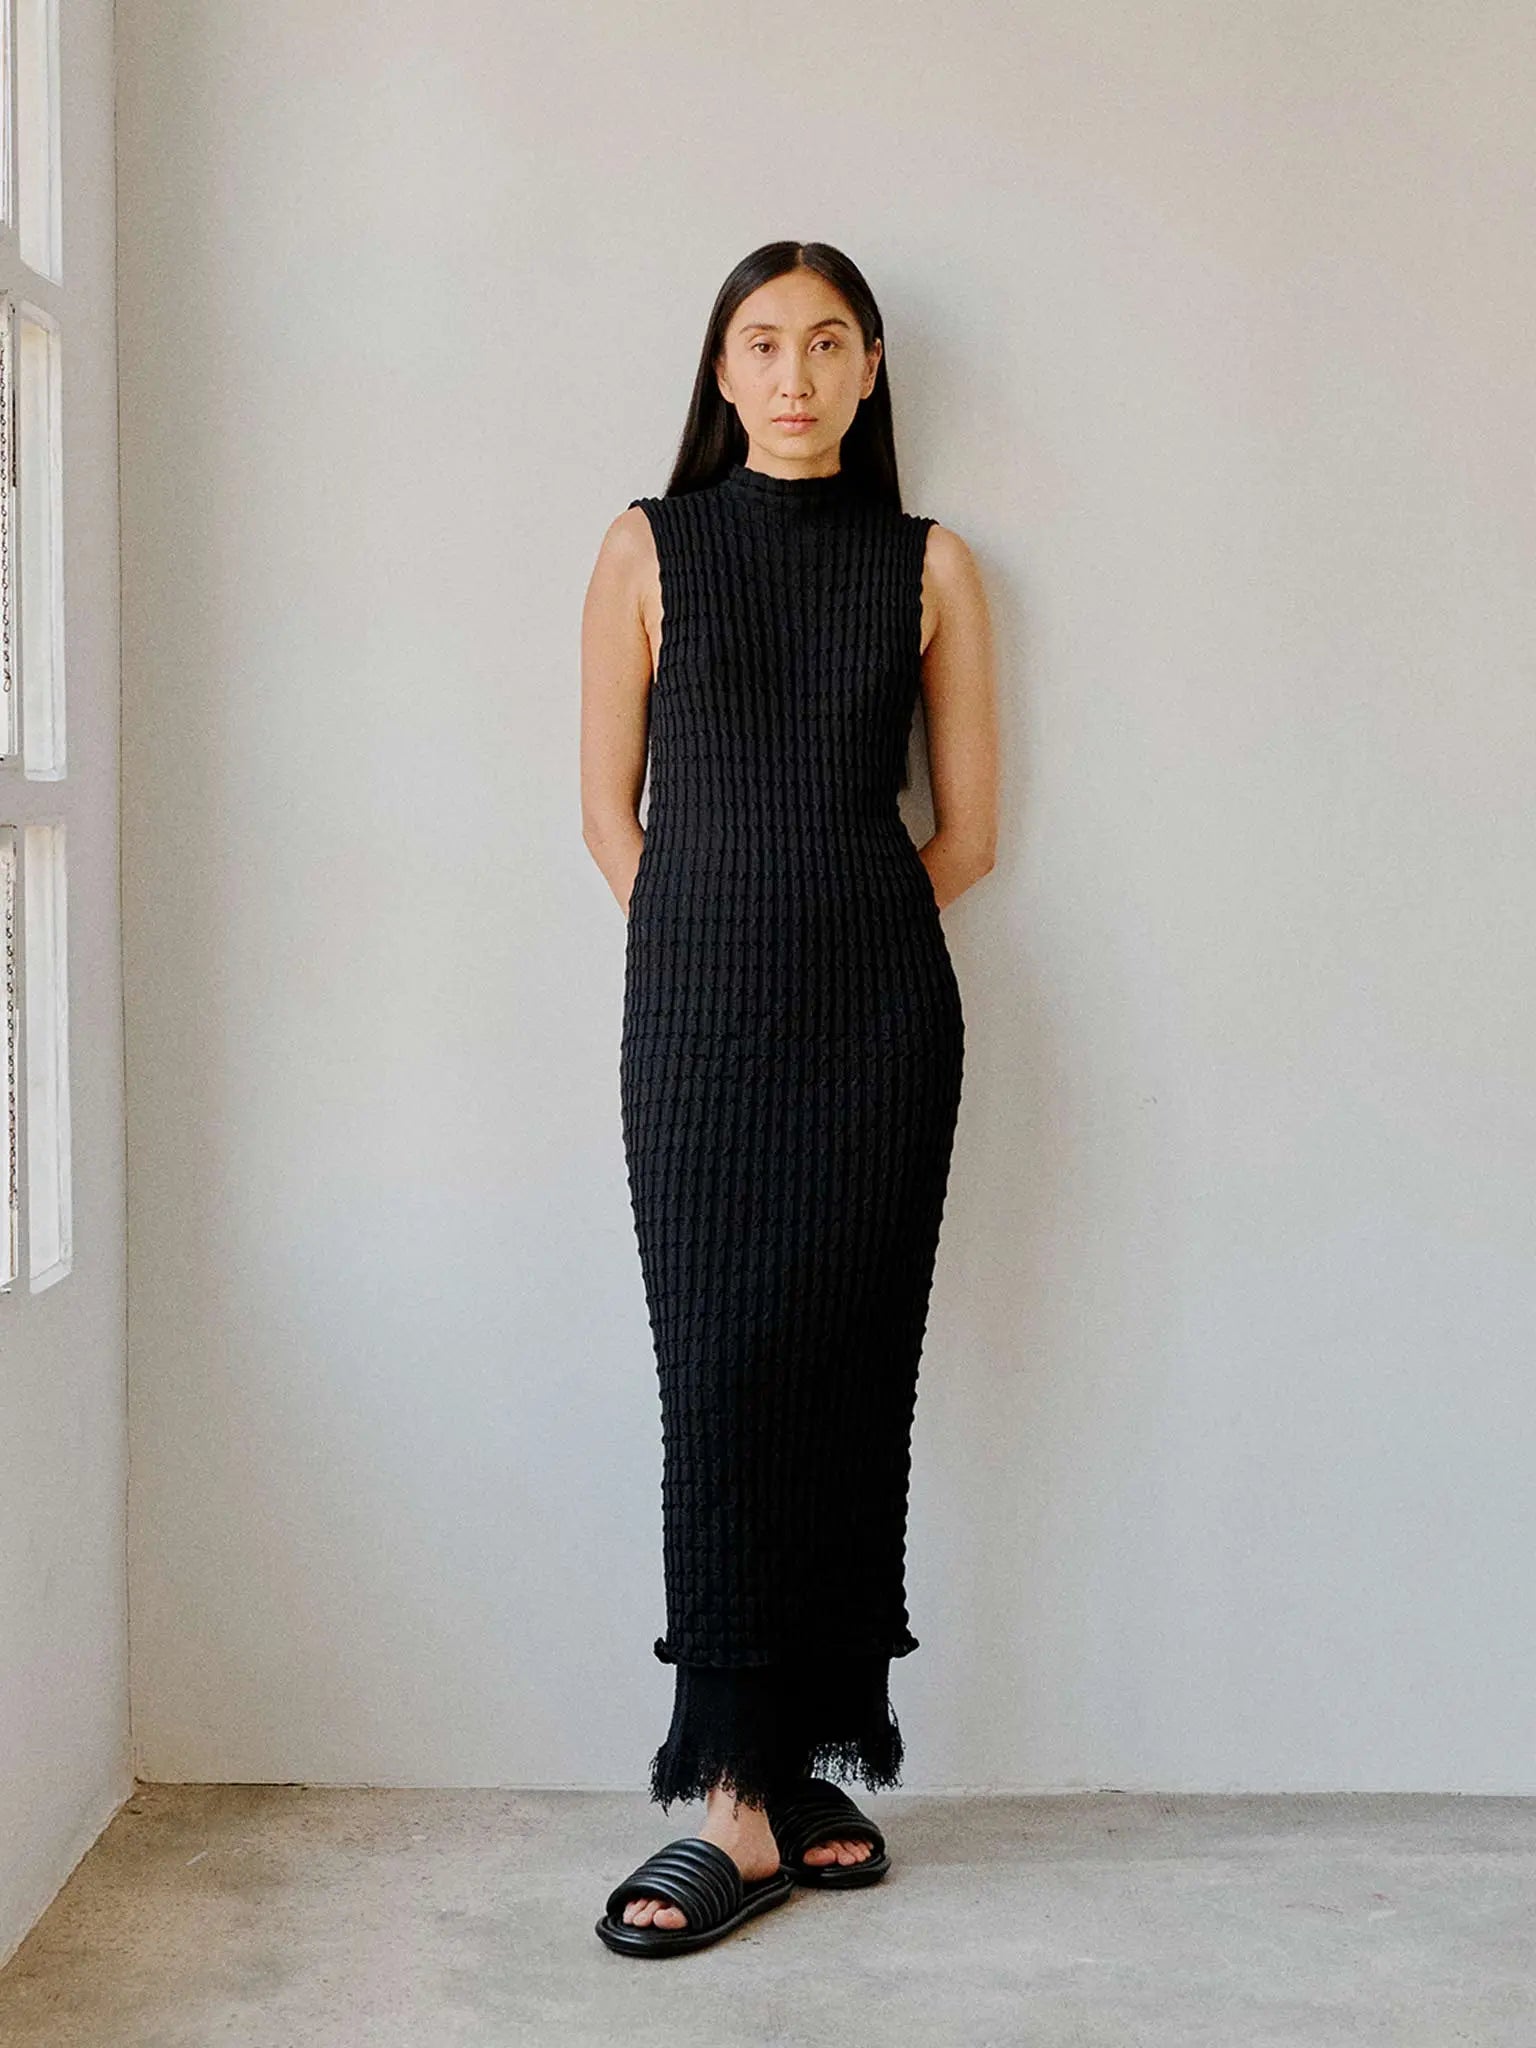 Image of the Udon Dress Ink by Rus, a black, sleeveless, ribbed-knit dress with a high neckline and a fitted silhouette. The dress extends to mid-calf length, showcasing a sleek, elegant design. Available at Bassalstore in Barcelona, the hemline has a slight scalloped edge.